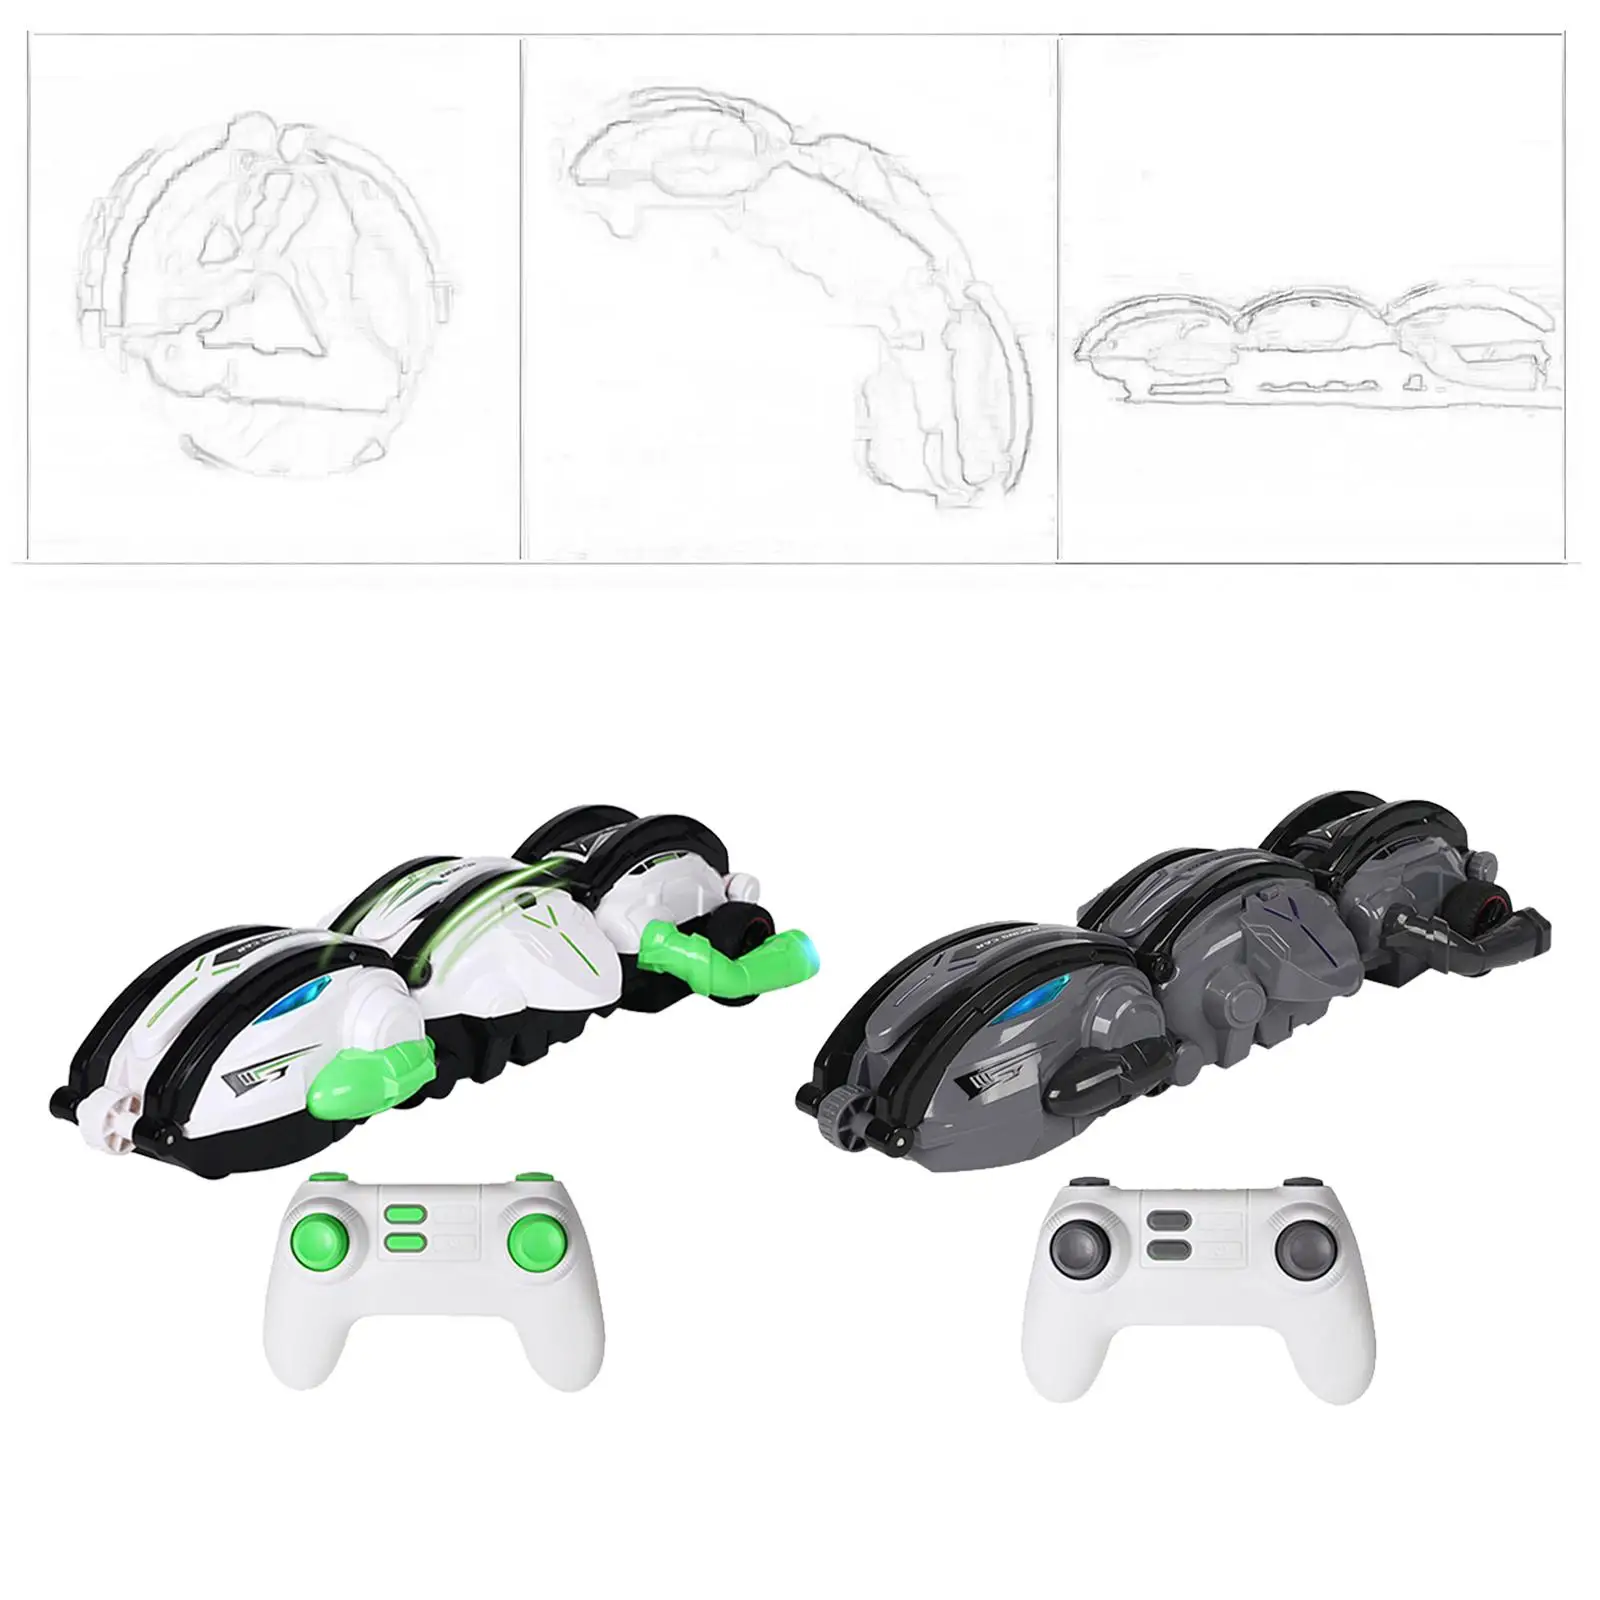 Snake 360° Roll Toy with Lights Electric Competitive RC Stunt Car Toy for 3 4 5 6 7 8 9 10 11 12 Year Old Birthday Gifts